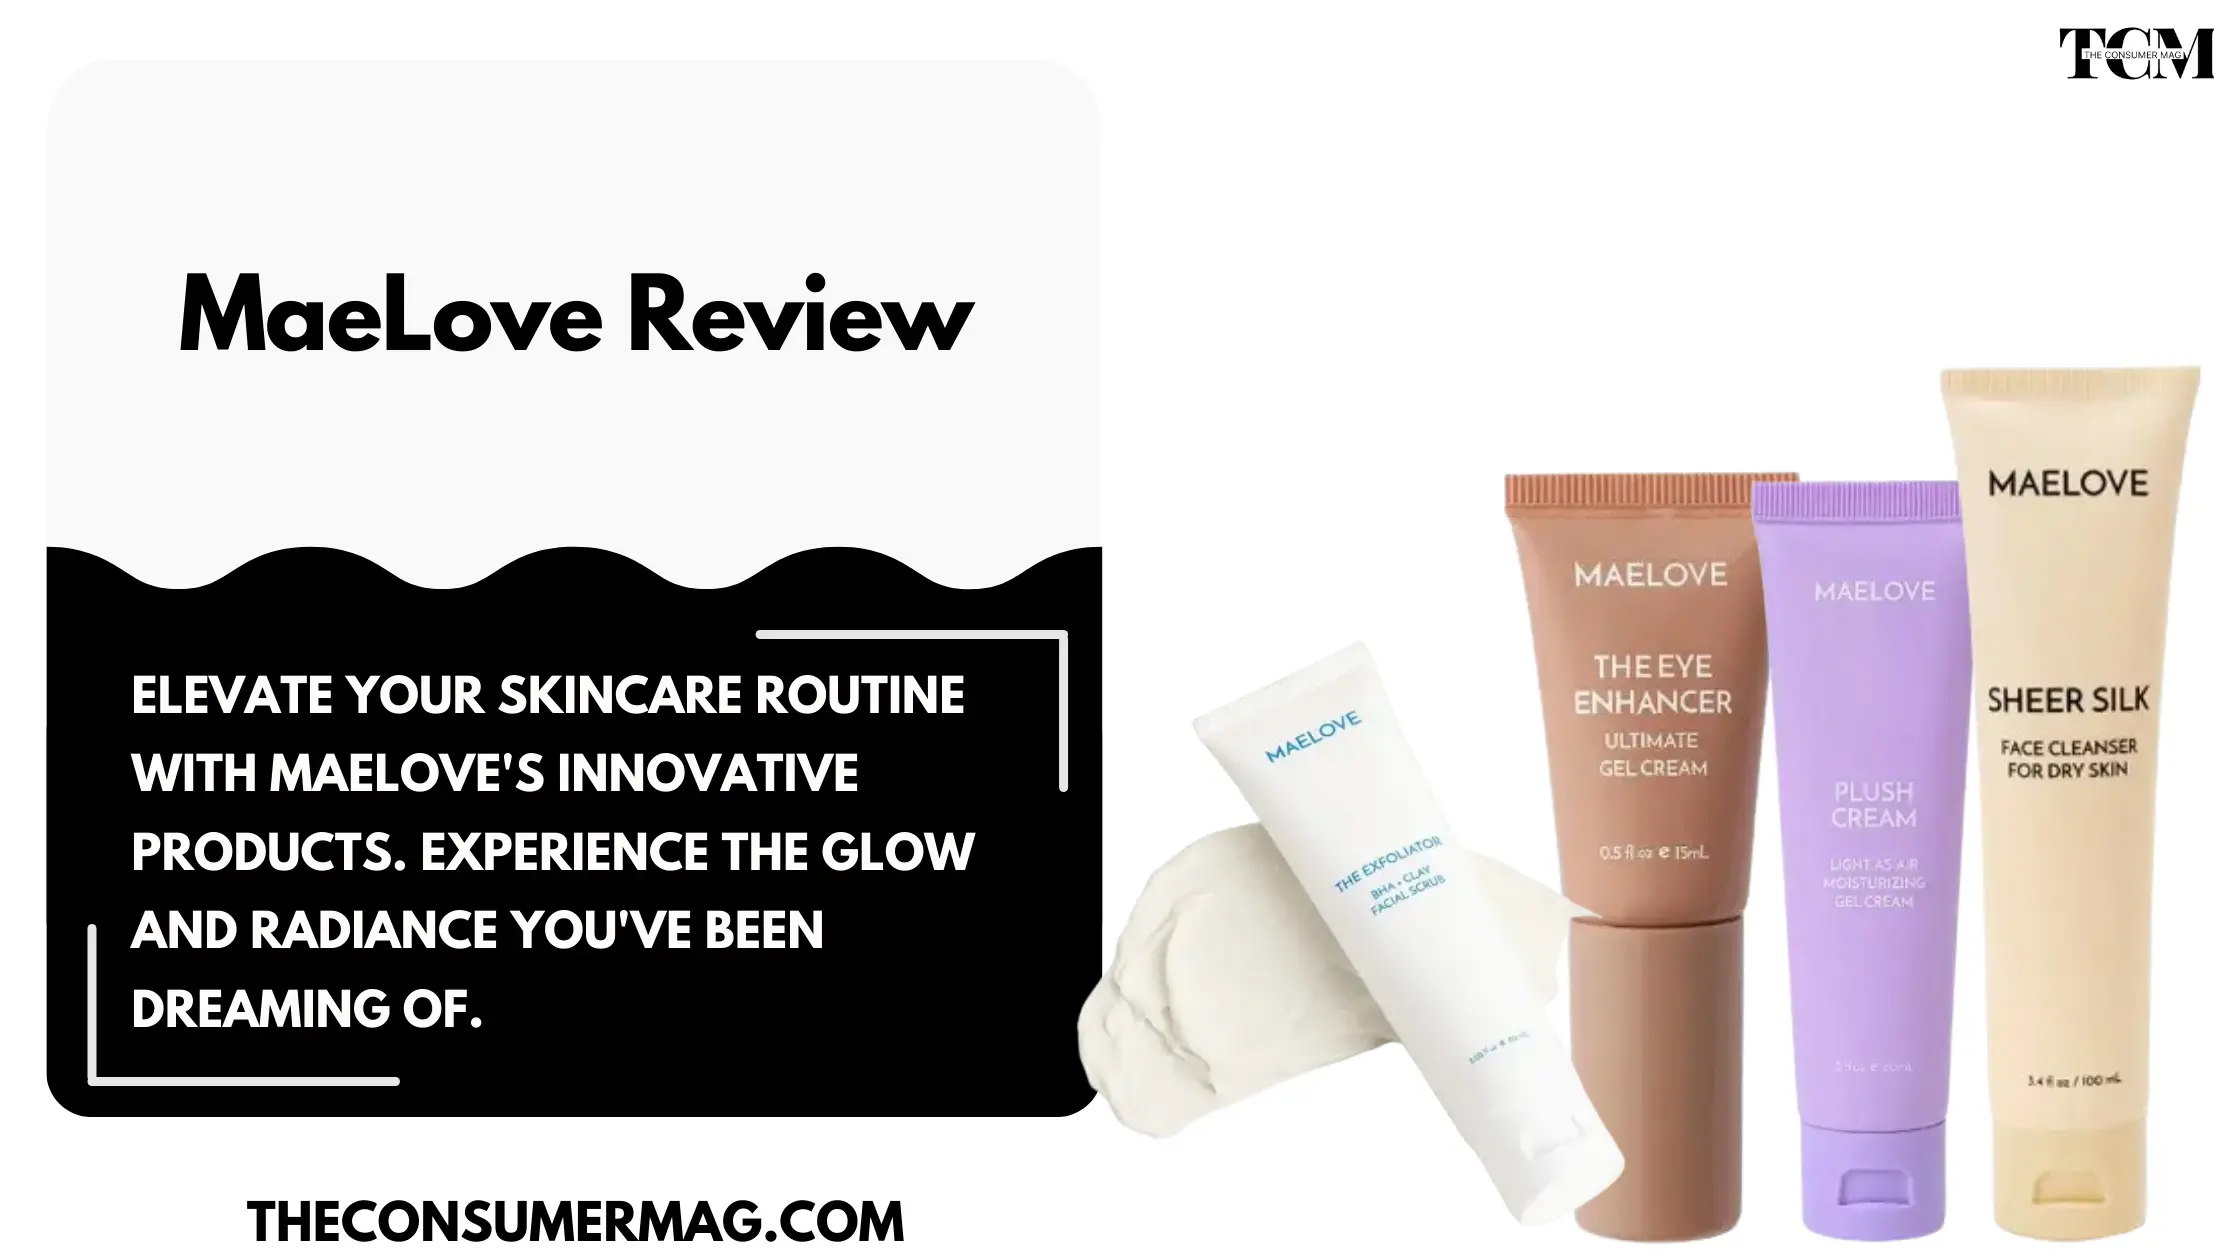 MaeLove Reviews: Daily Skincare Routine for Glowing Skin